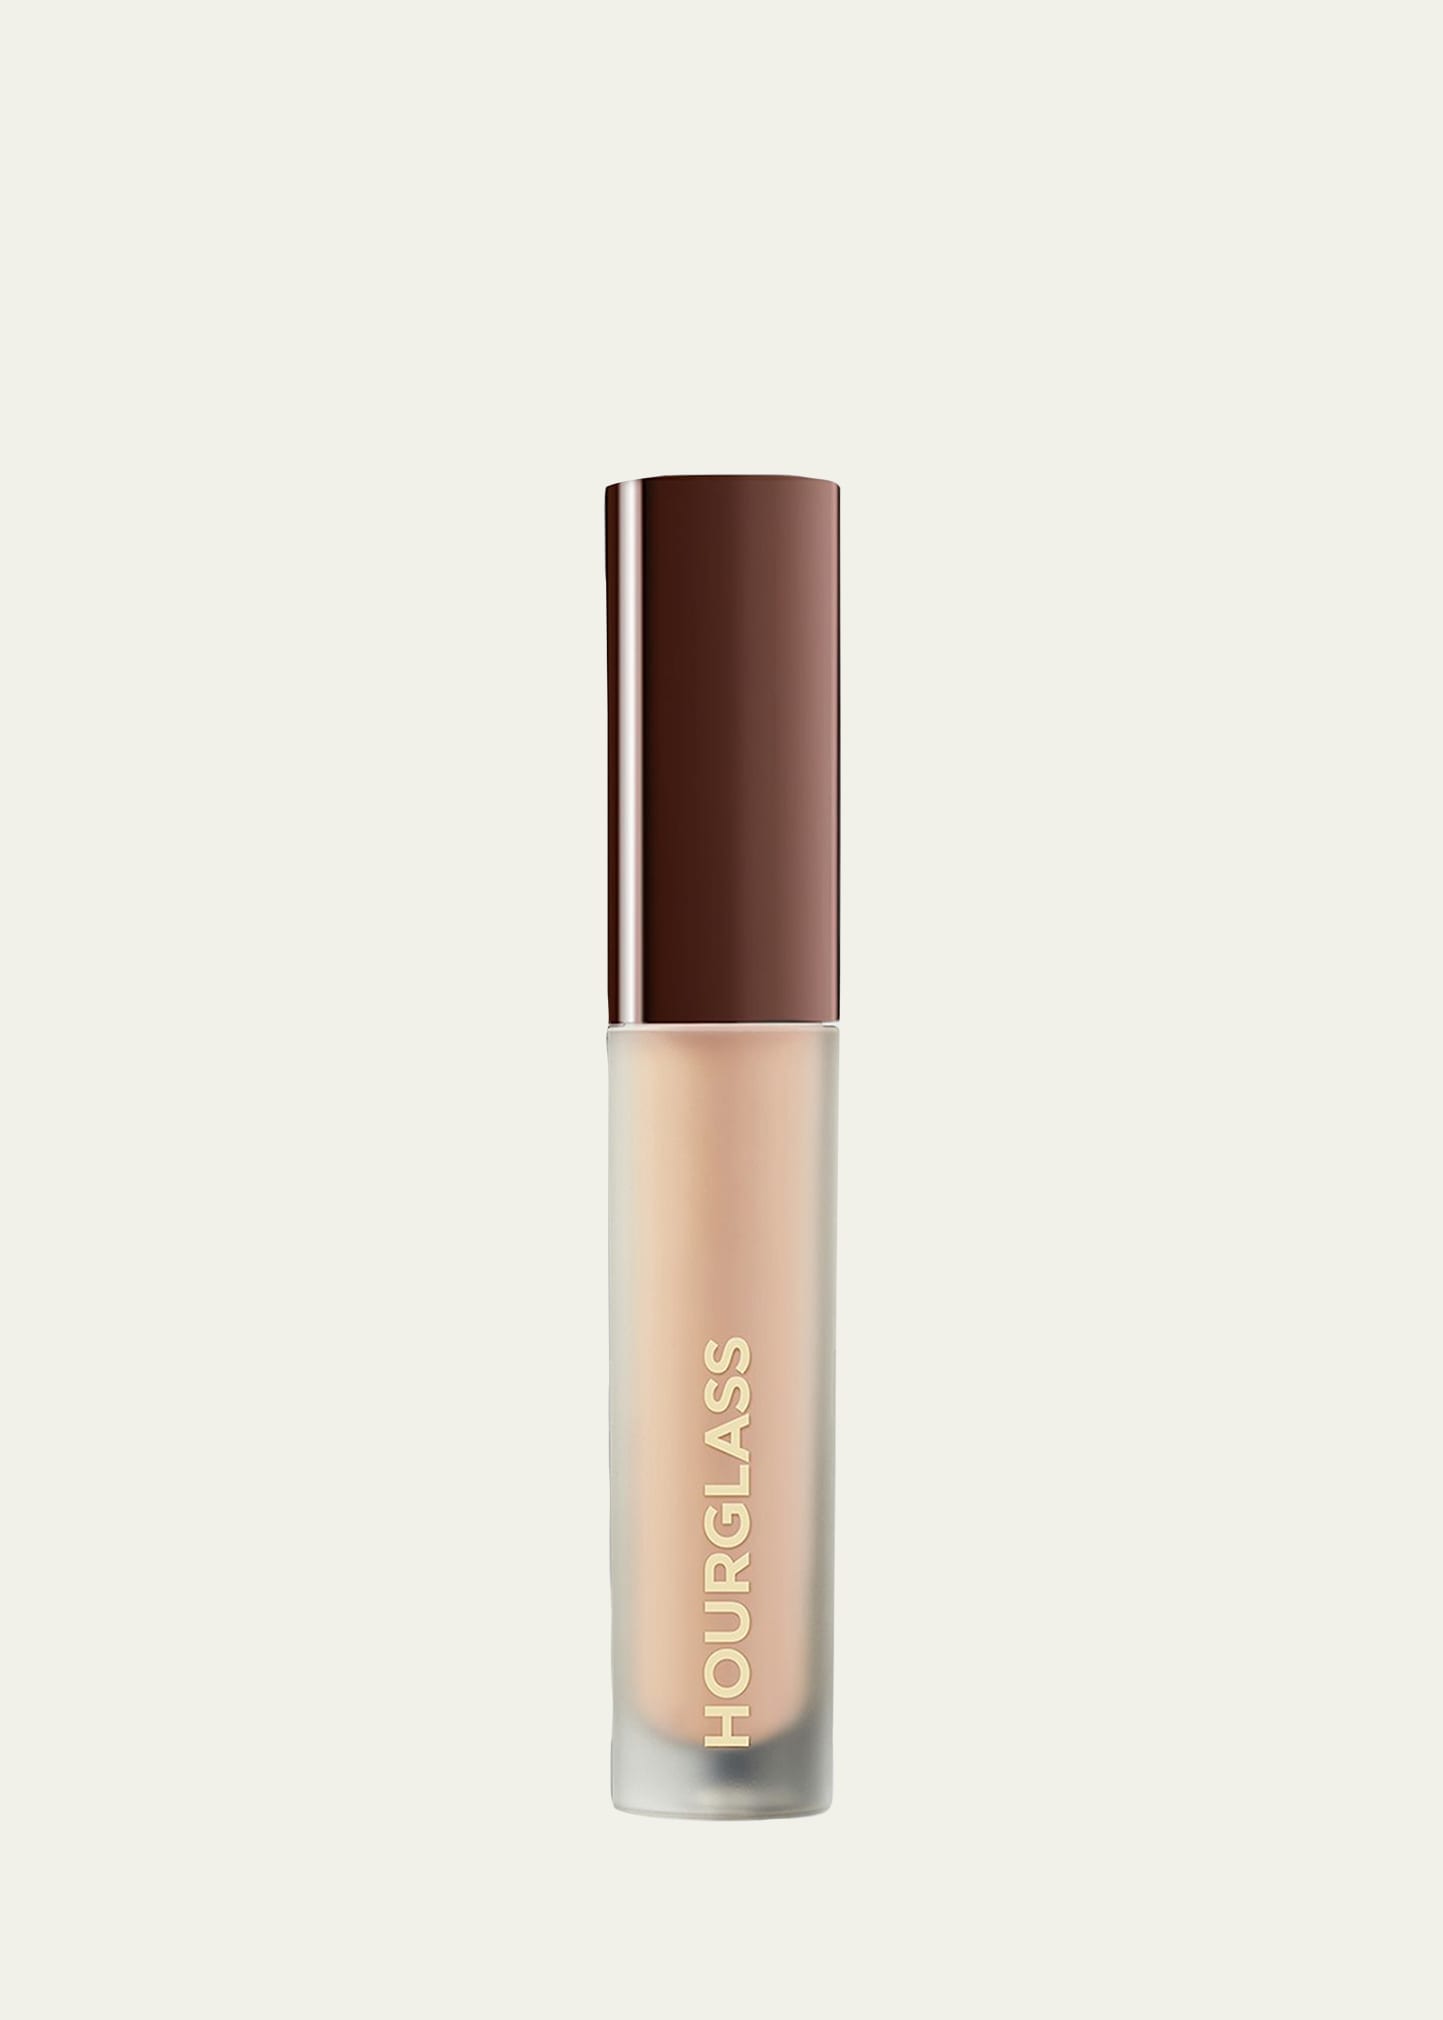 Hourglass Vanish Airbrush Concealer - Travel Size In Crme 1.5